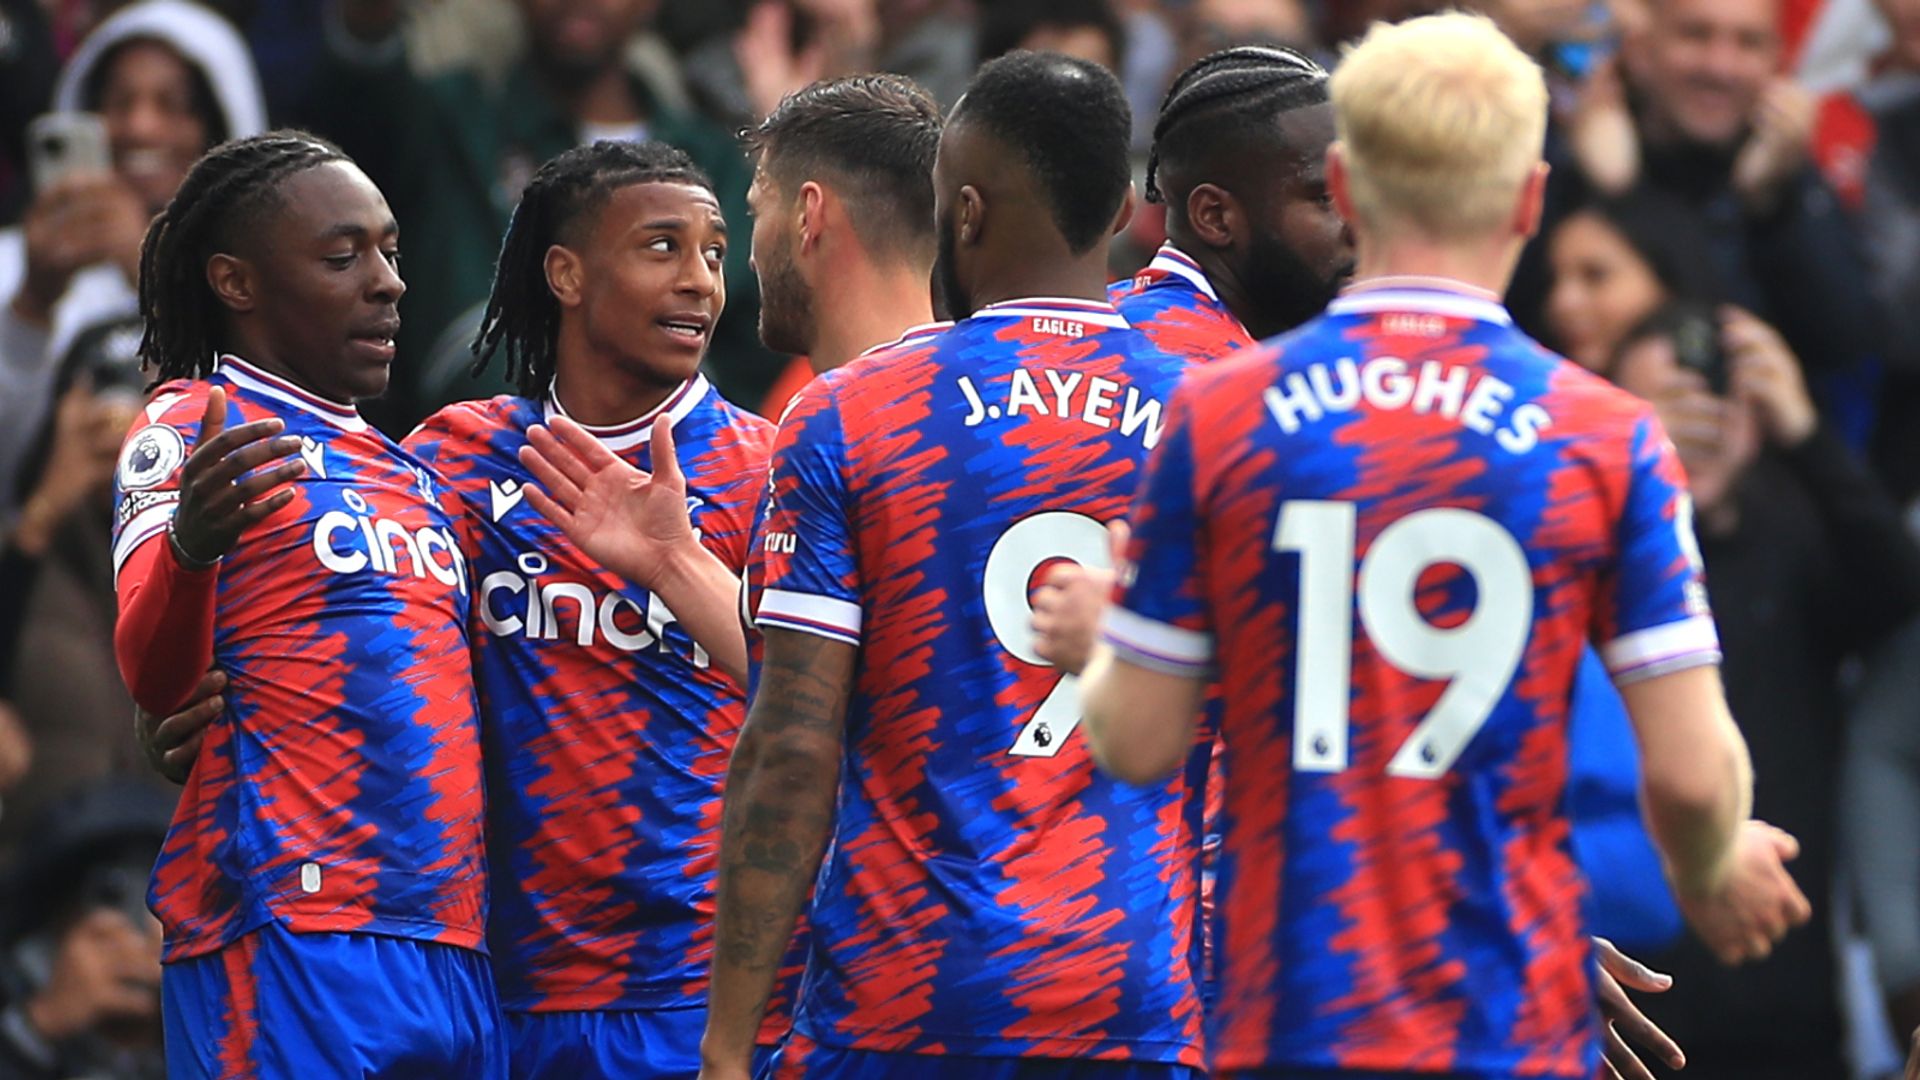 Eze's classy double gives Palace win over Bournemouth